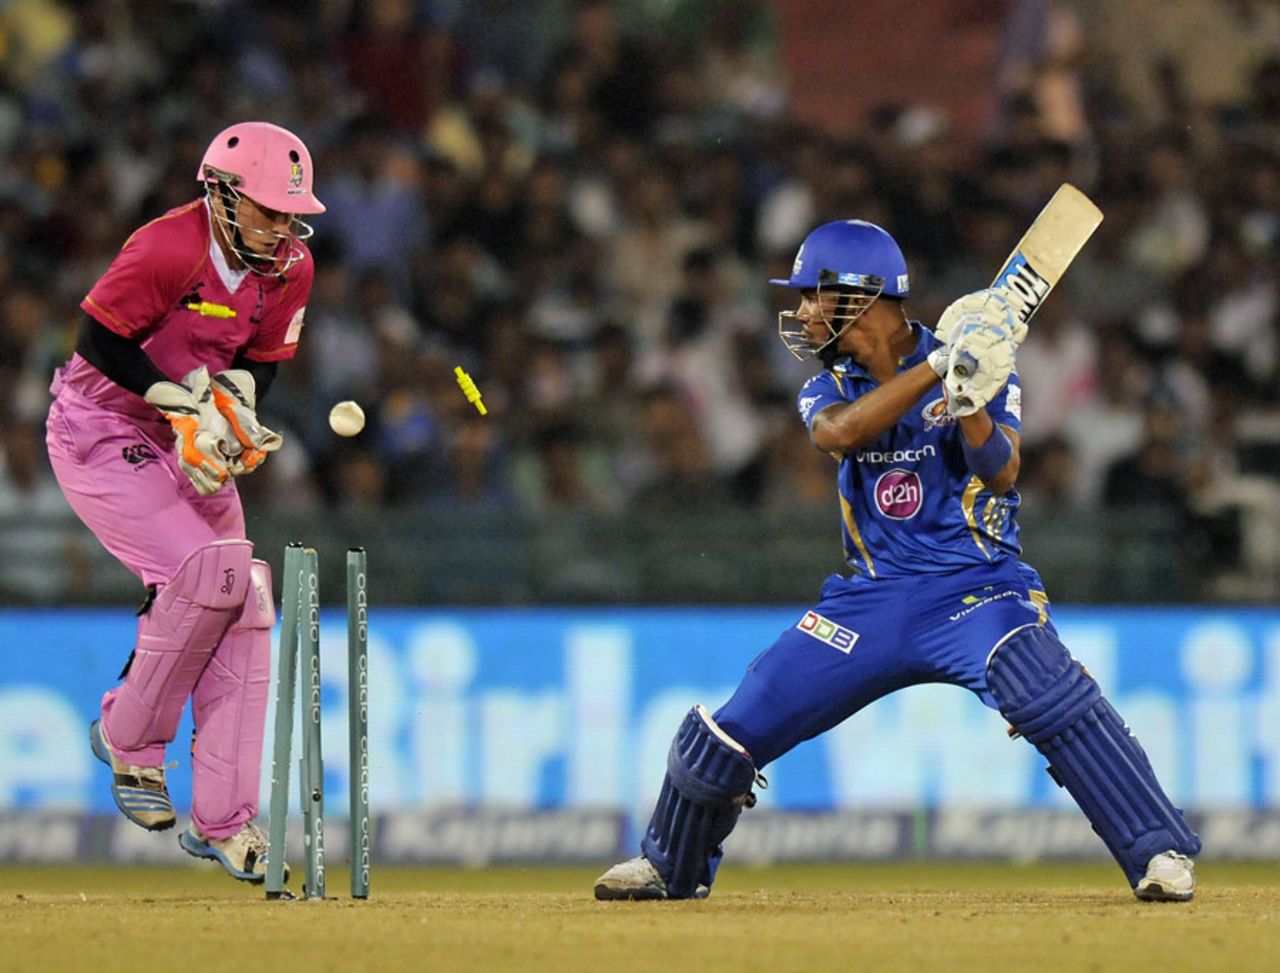 Lendl Simmons was bowled by Scott Styris for 13, Mumbai Indians v Northern Knights, CLT20 qualifier, Raipur, September 16, 2014